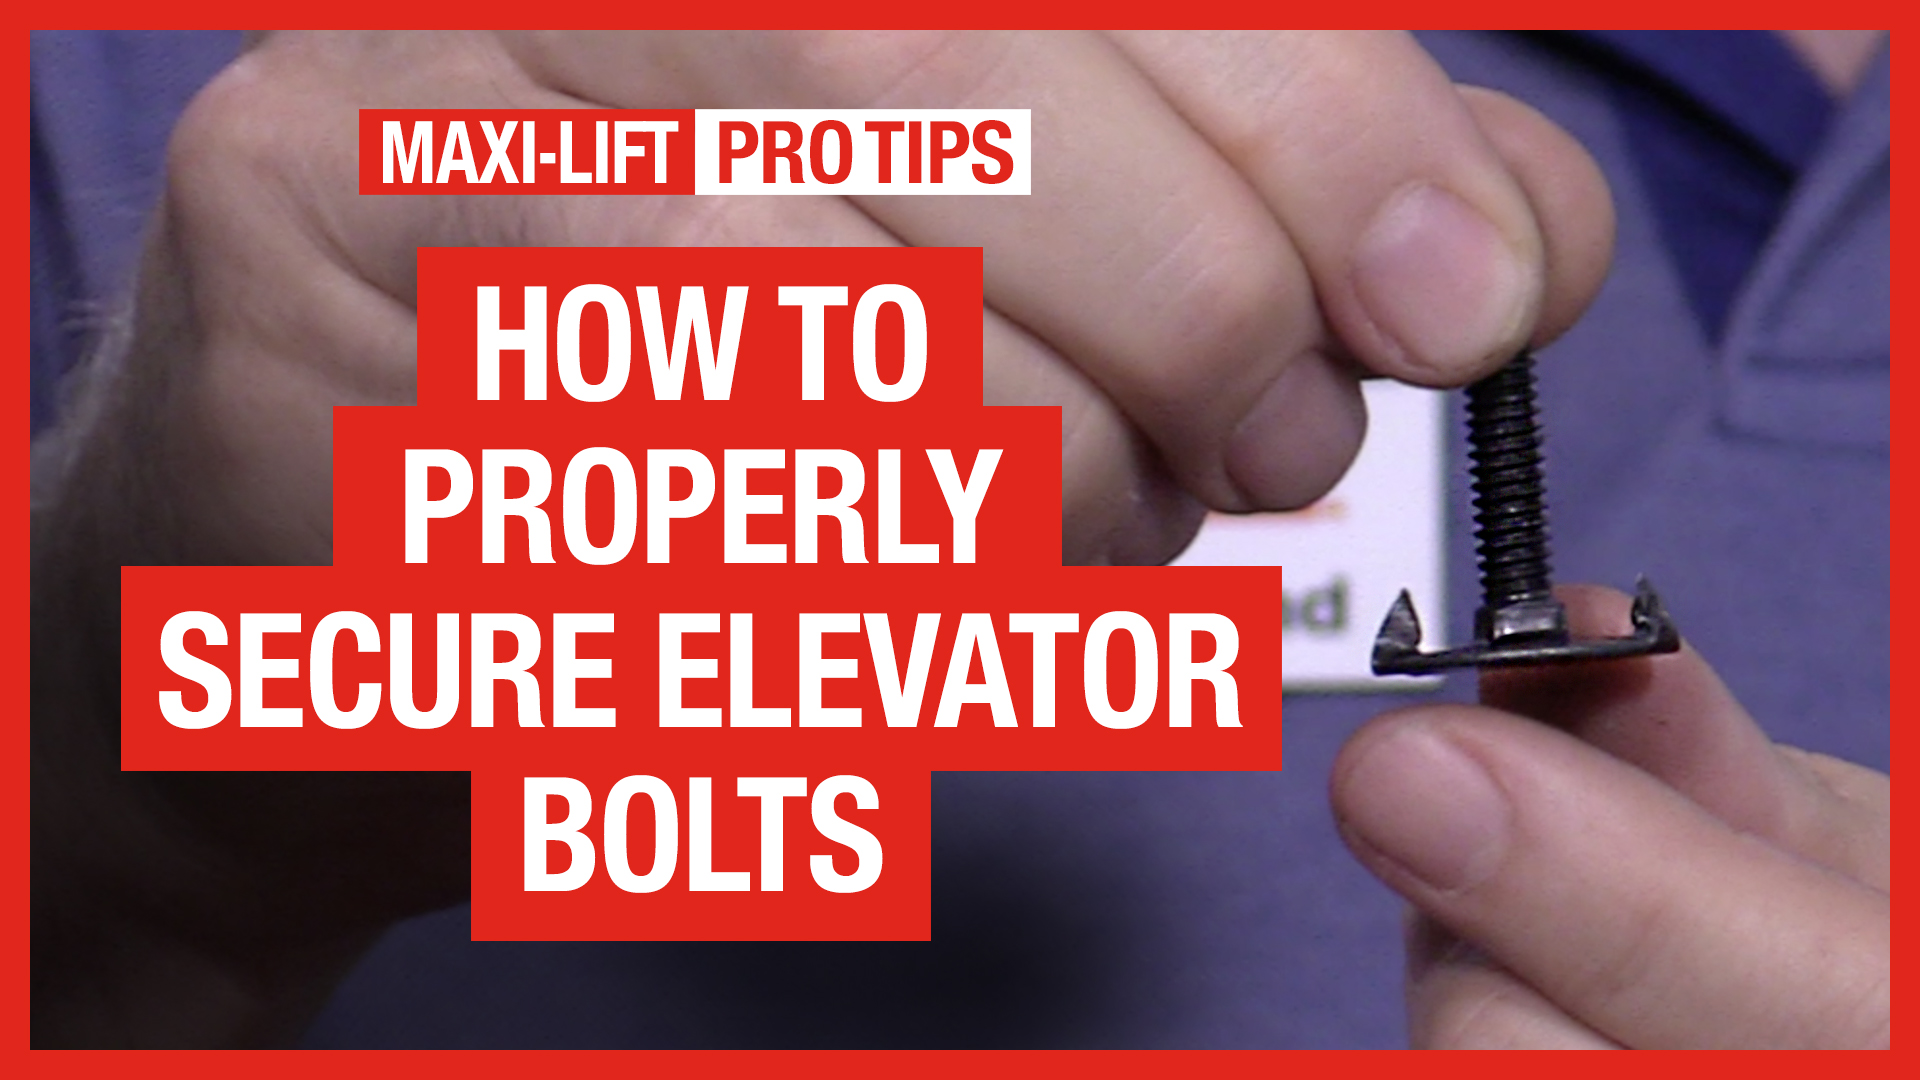 Maxi-Lift Pro Tips - how to secure elevator bolts